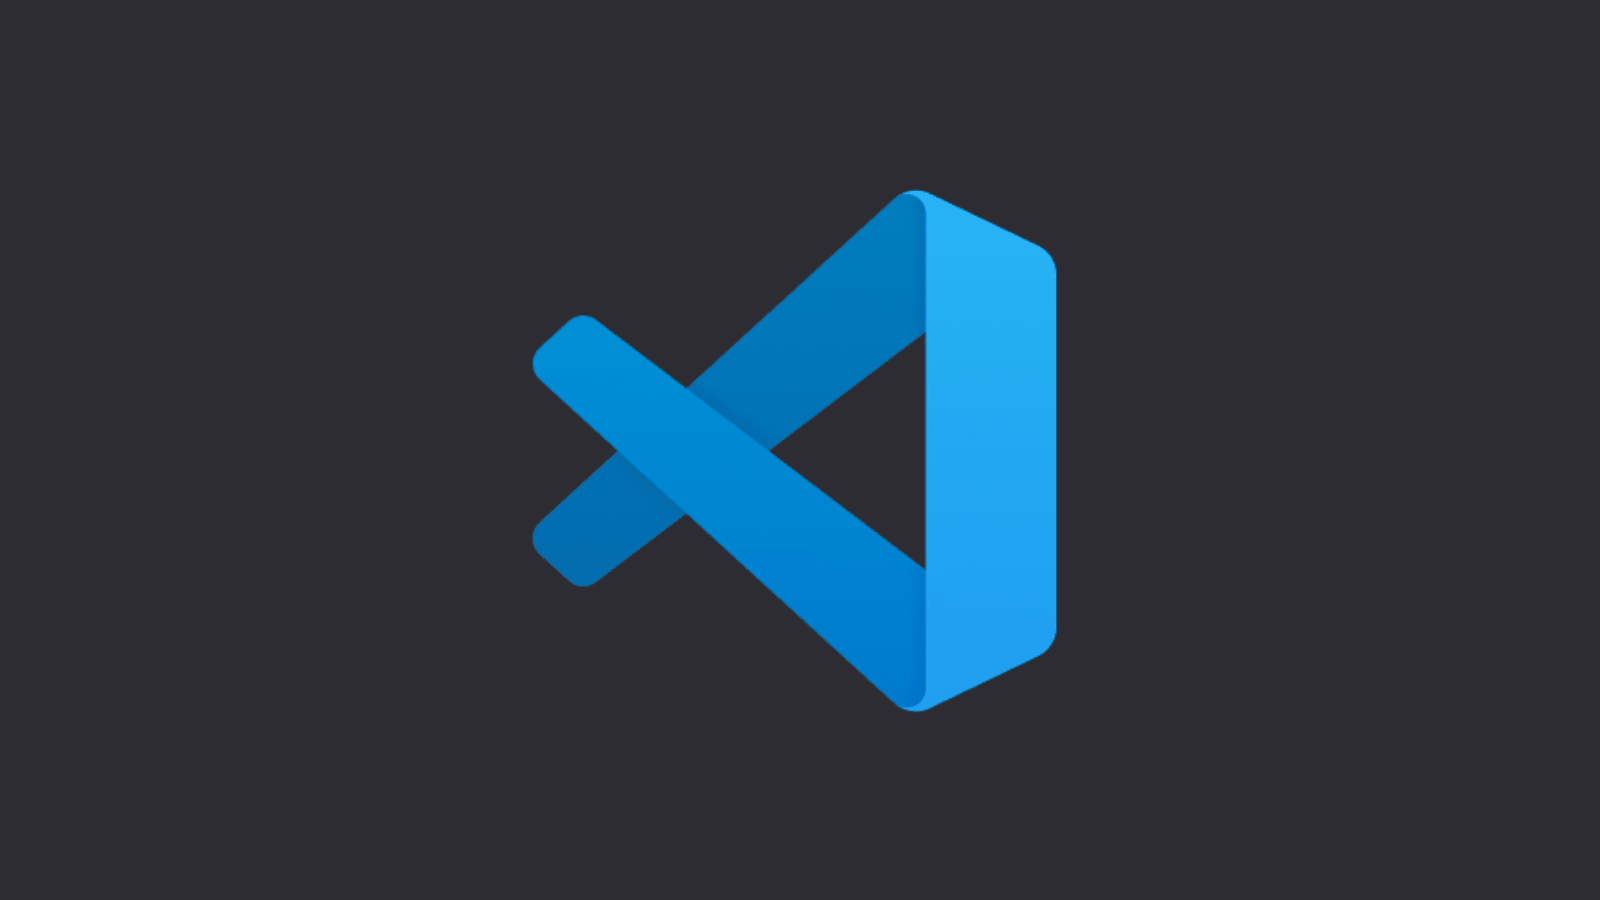 Visual studio code logo with transparent background |  marcusbioserfortcon1986's Ownd